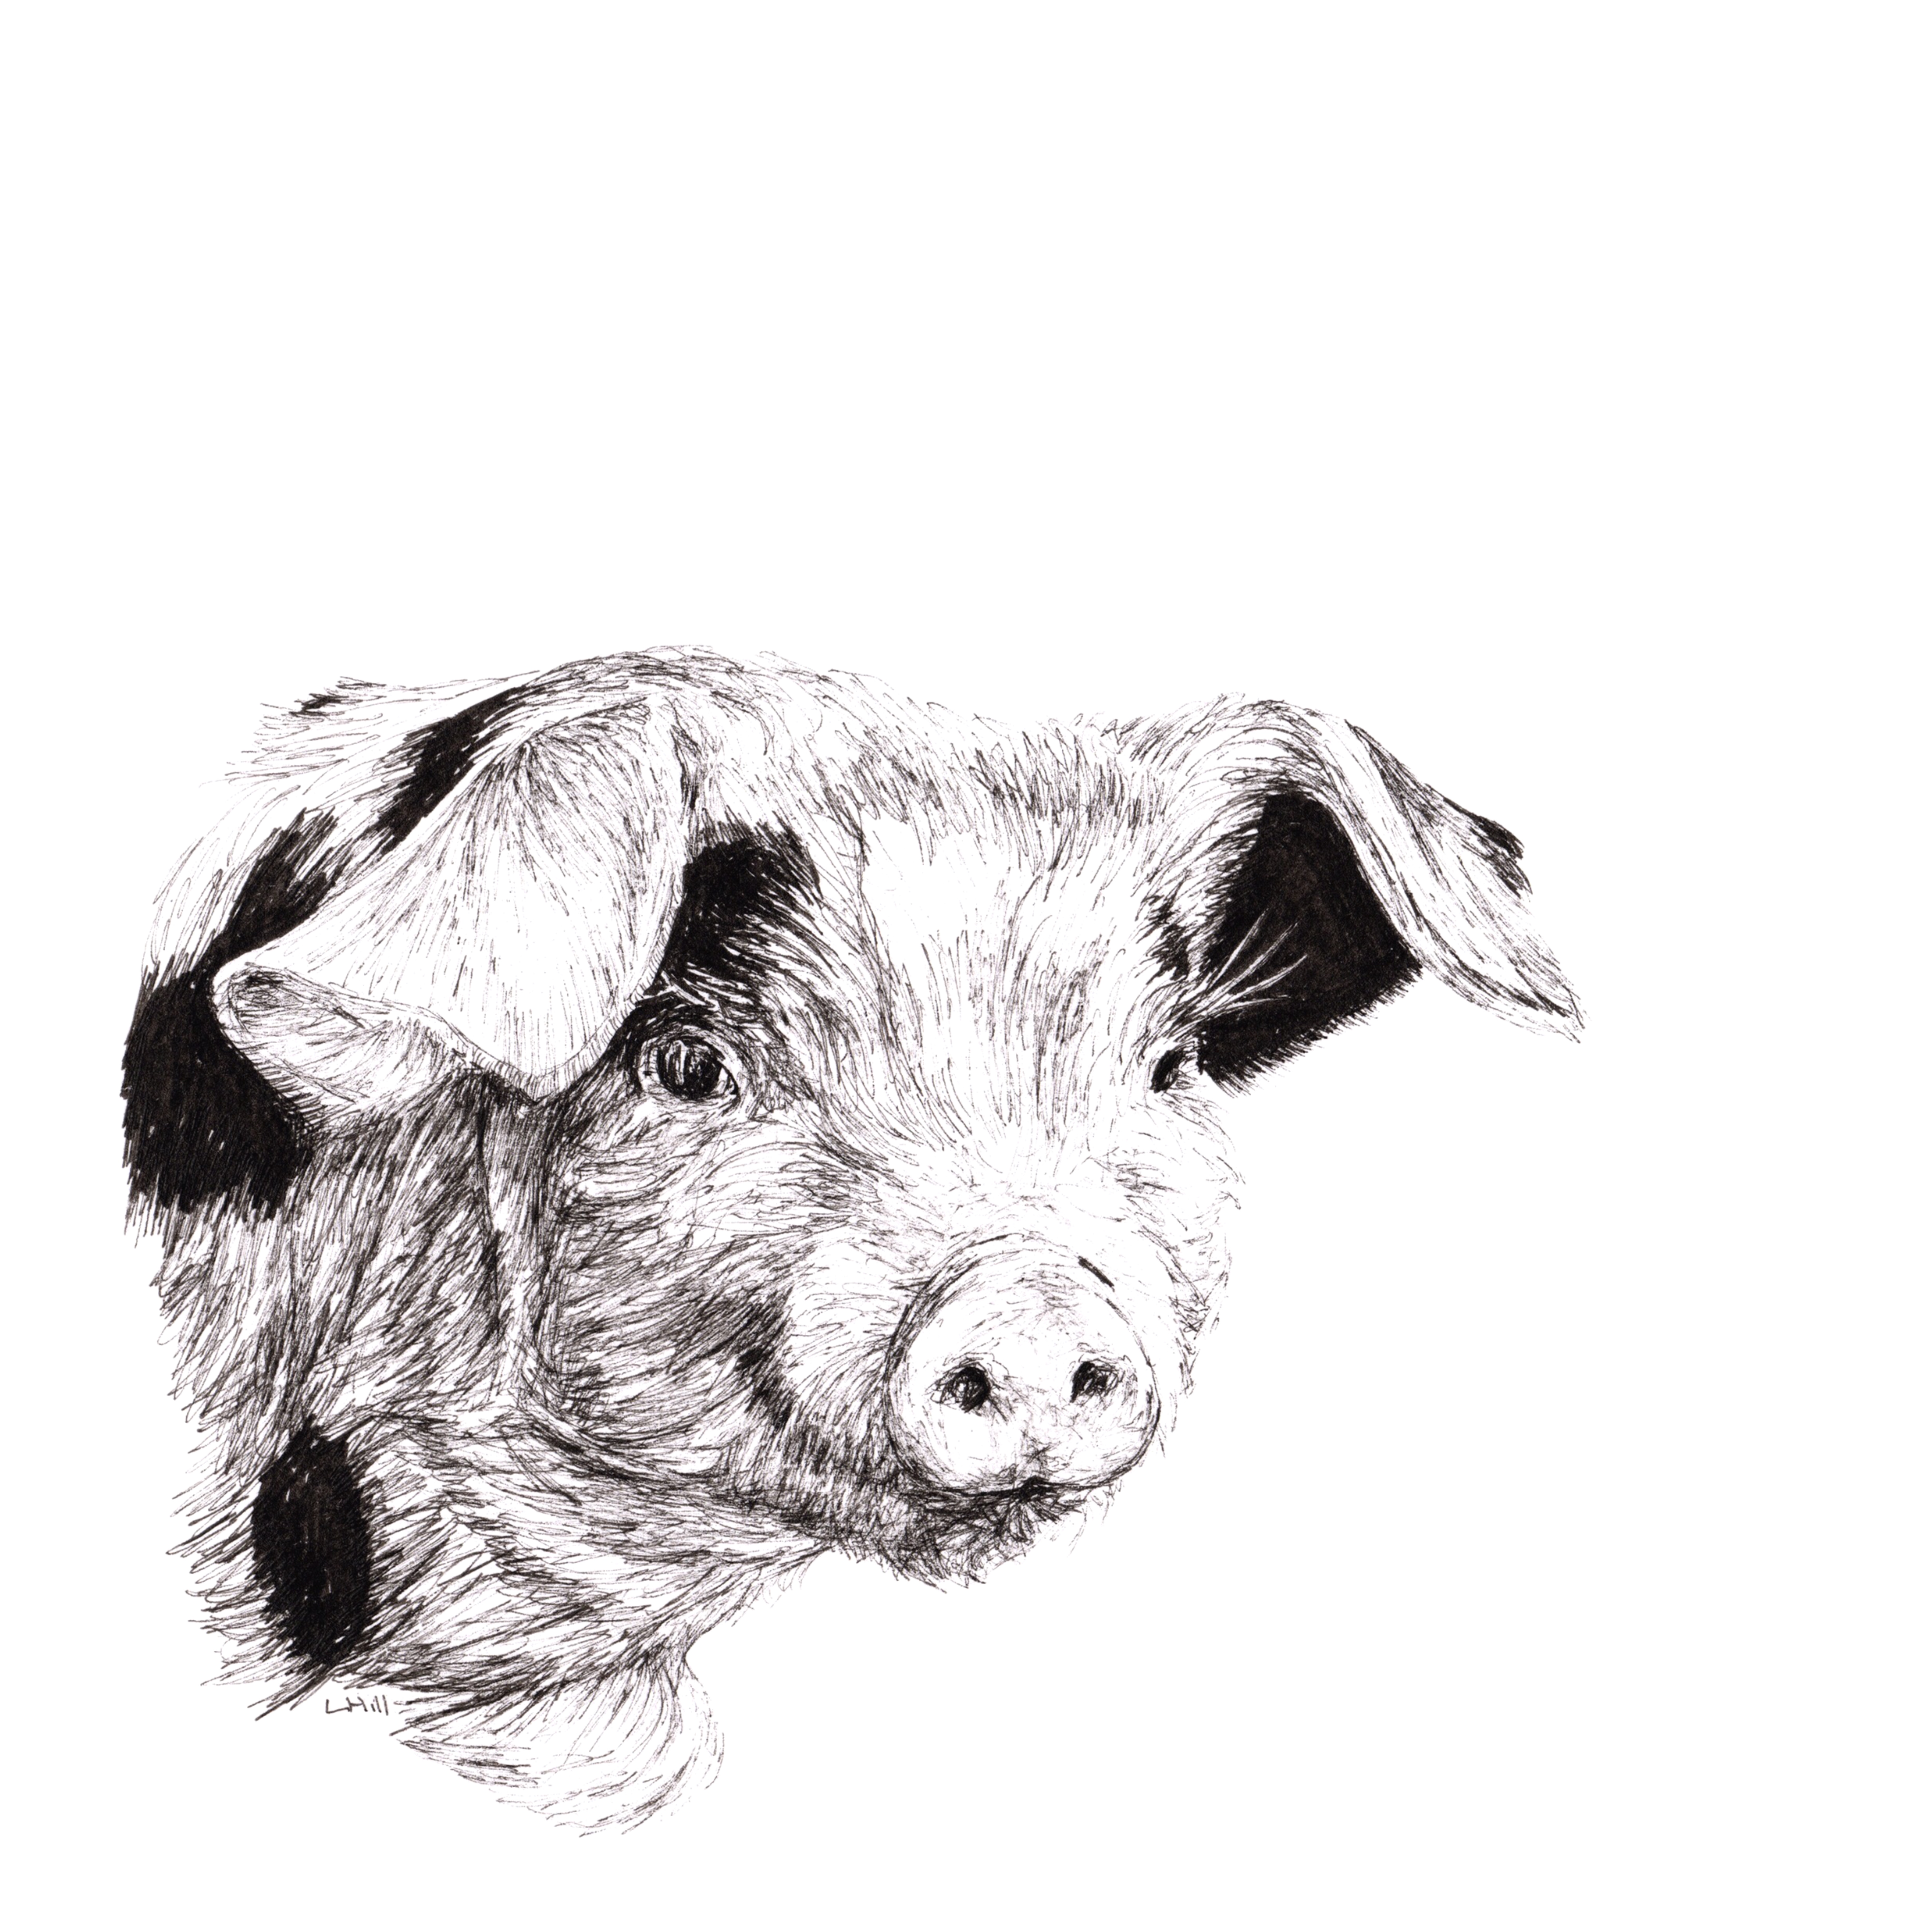 Piglet pen and ink illustration by Louisa Hill